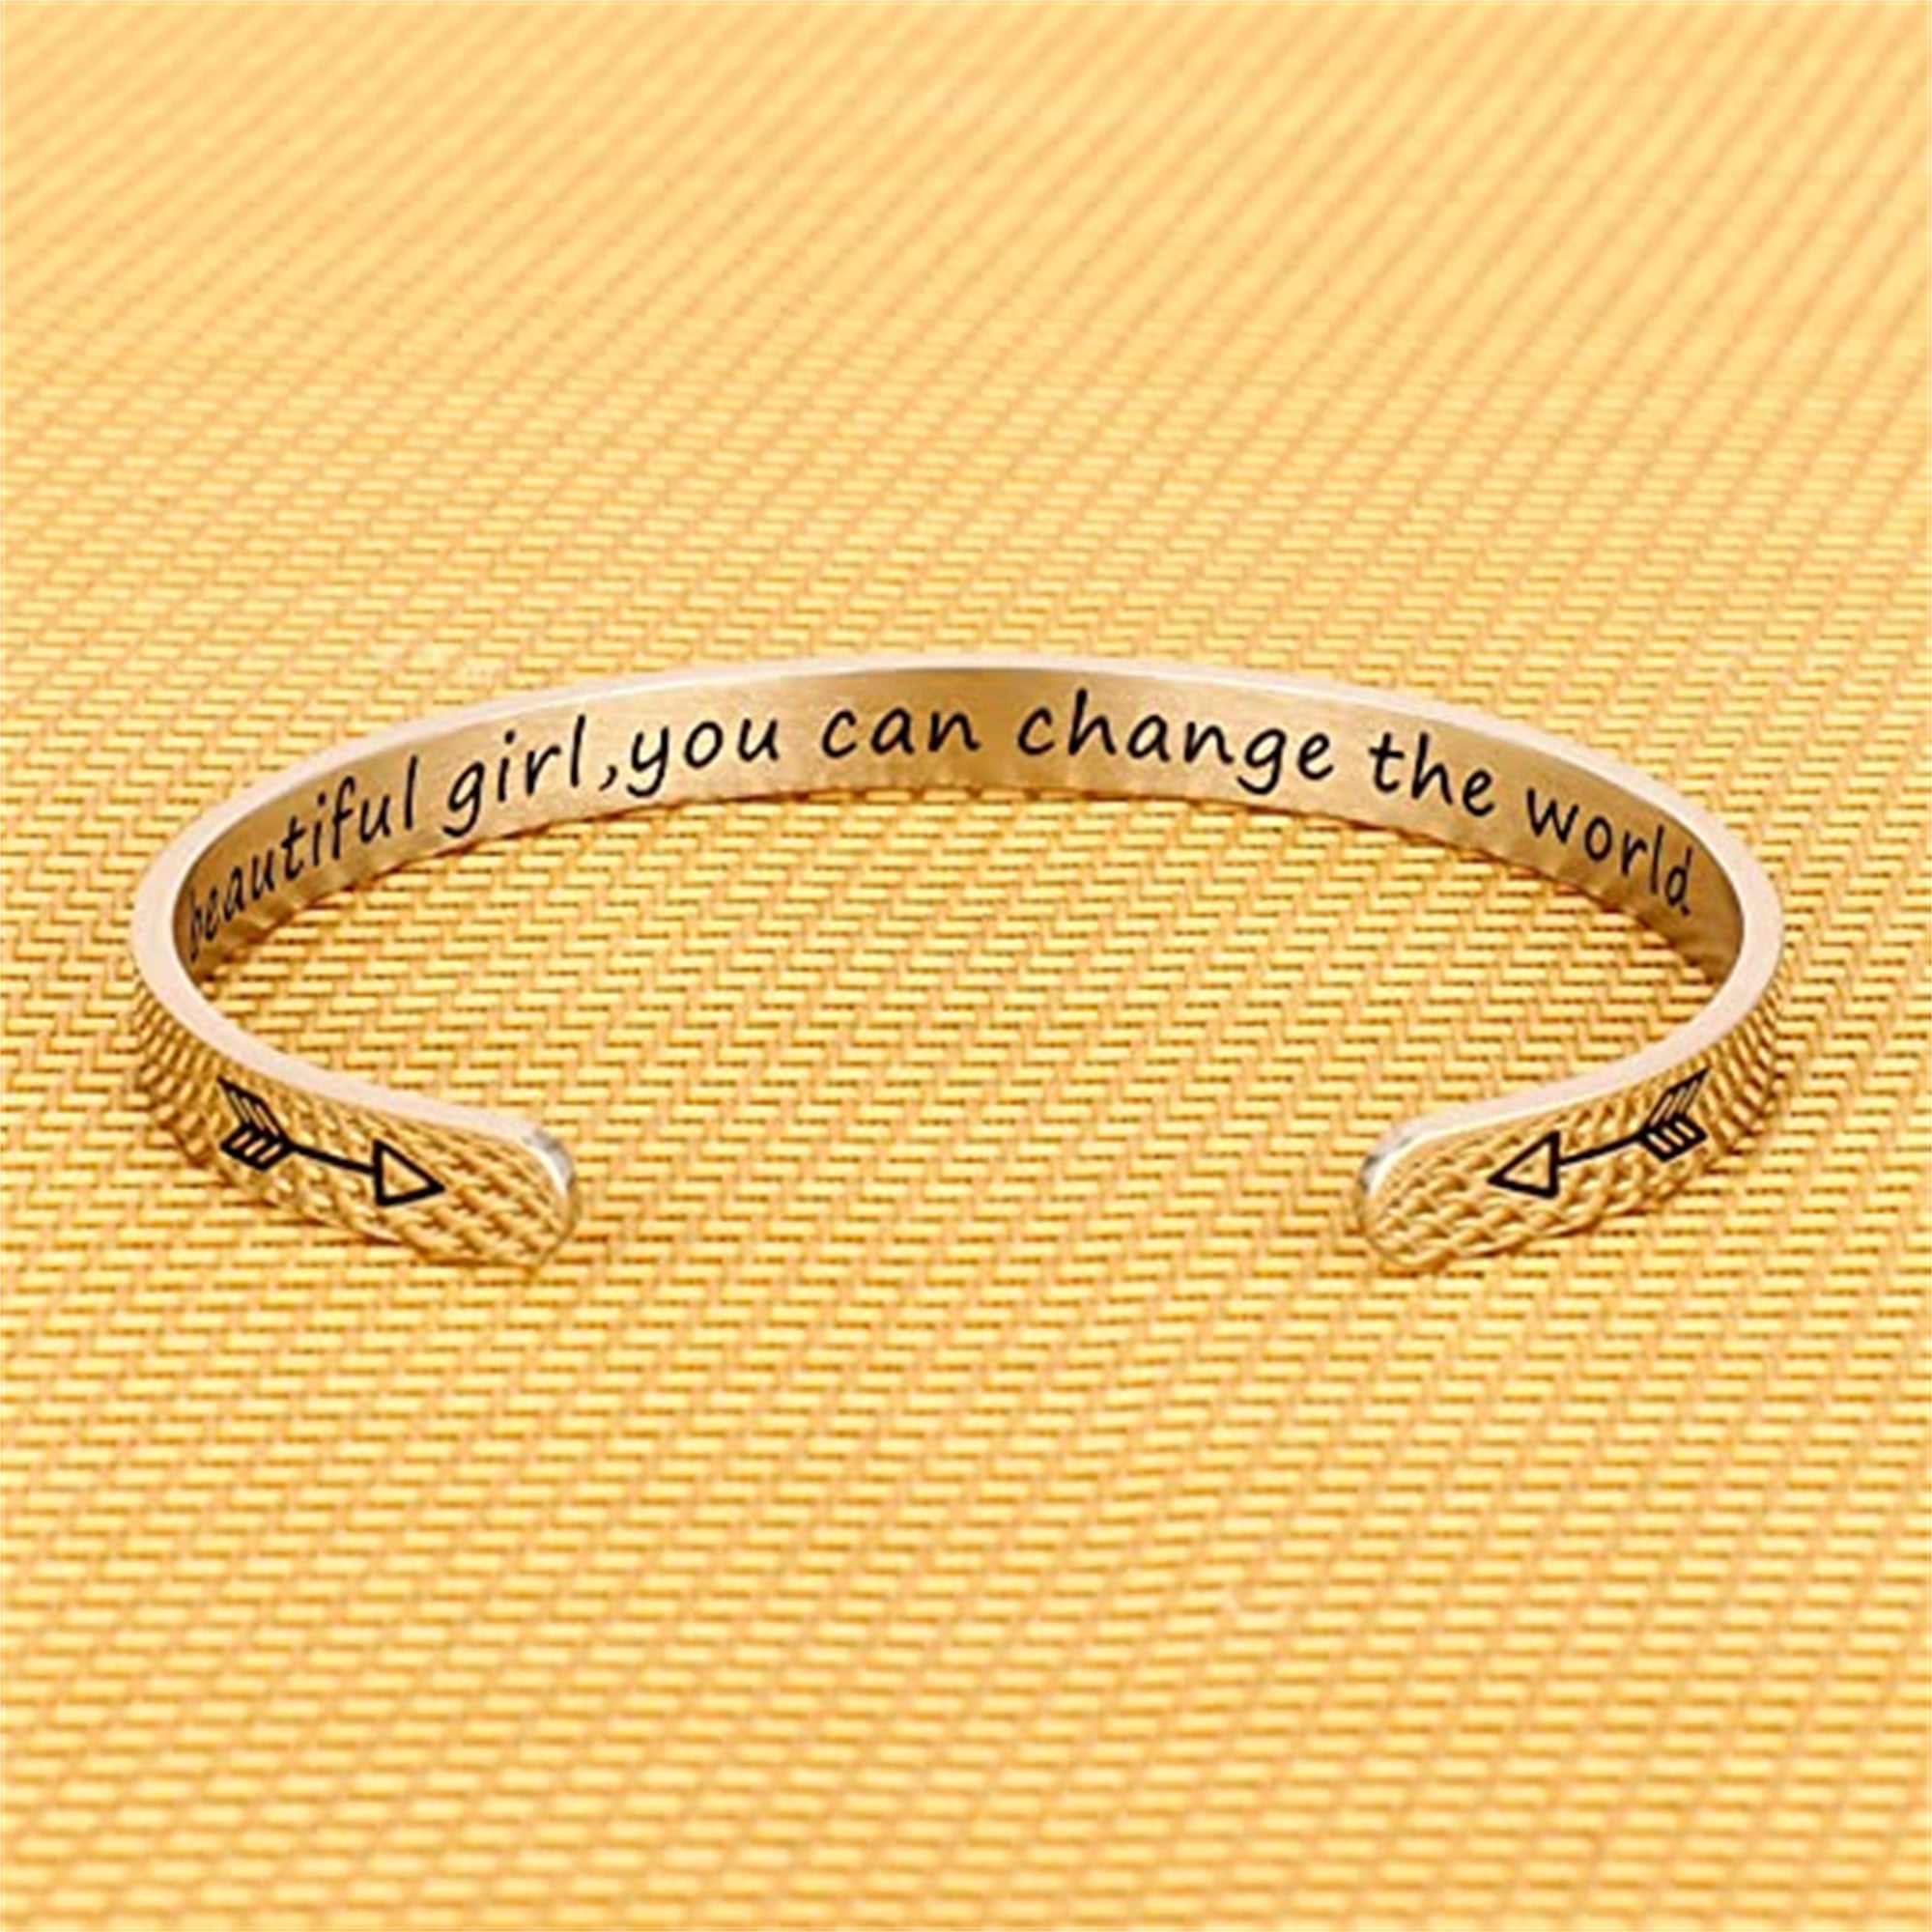 SAM & LORI Graduation Gifts Inspirational Charm Bracelet Engraved with Grad Cap 2021 Personalized Adjustable Graduate Bangle Jewelry Friendship Present for College Senior High School Students Her Girl 